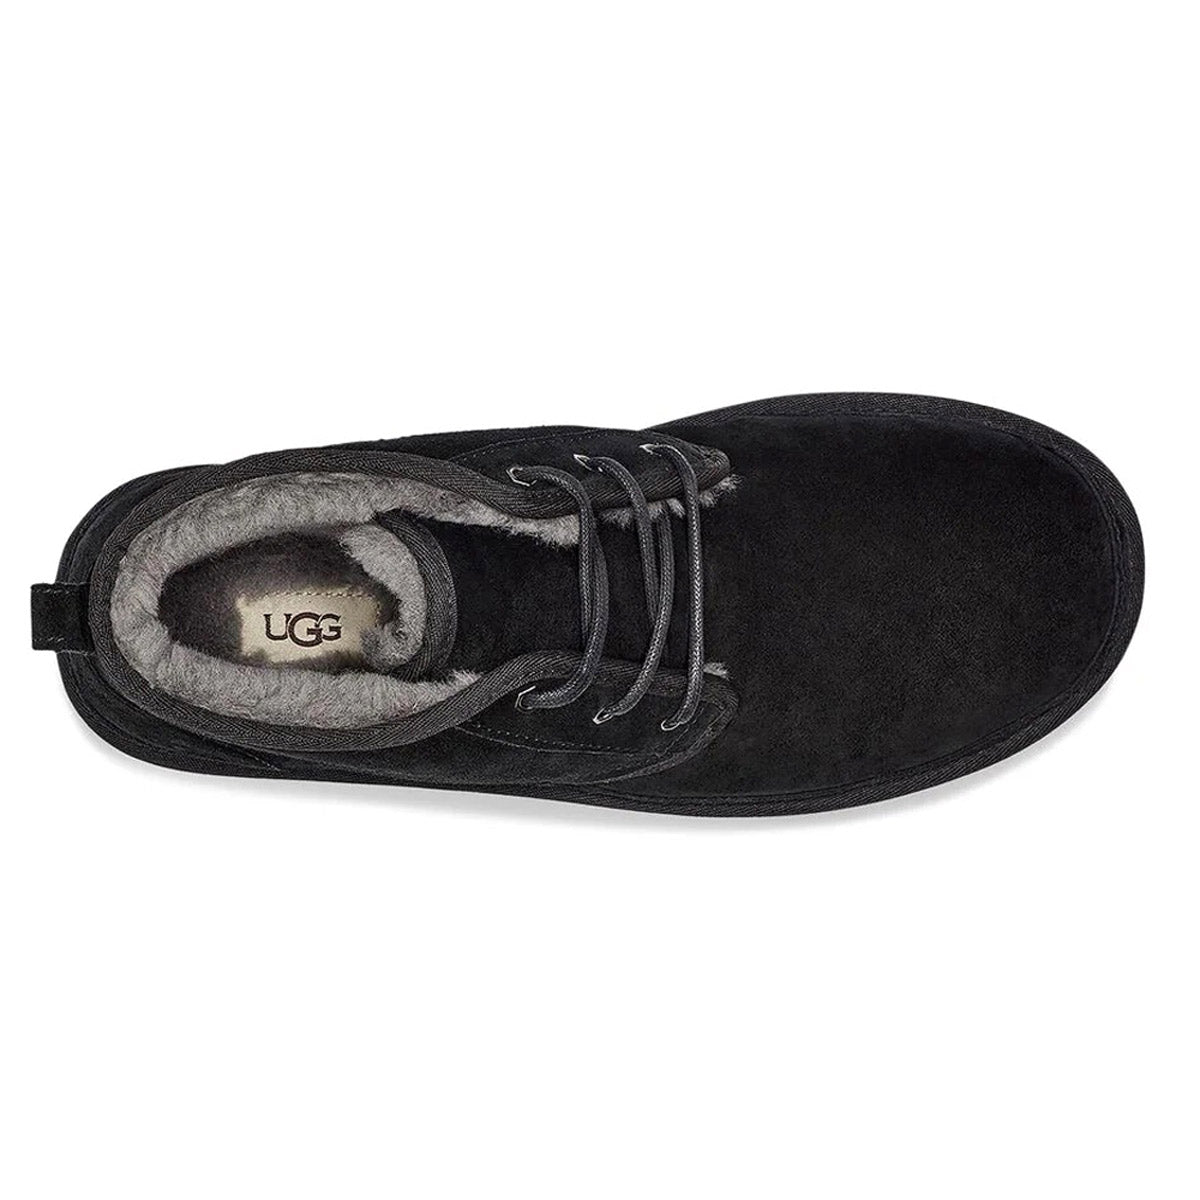 Top view of a black UGG NEUMEL CHUKKA BOOT BLACK - MENS with gray laces and a UGGpure wool lining, displayed against a white background.